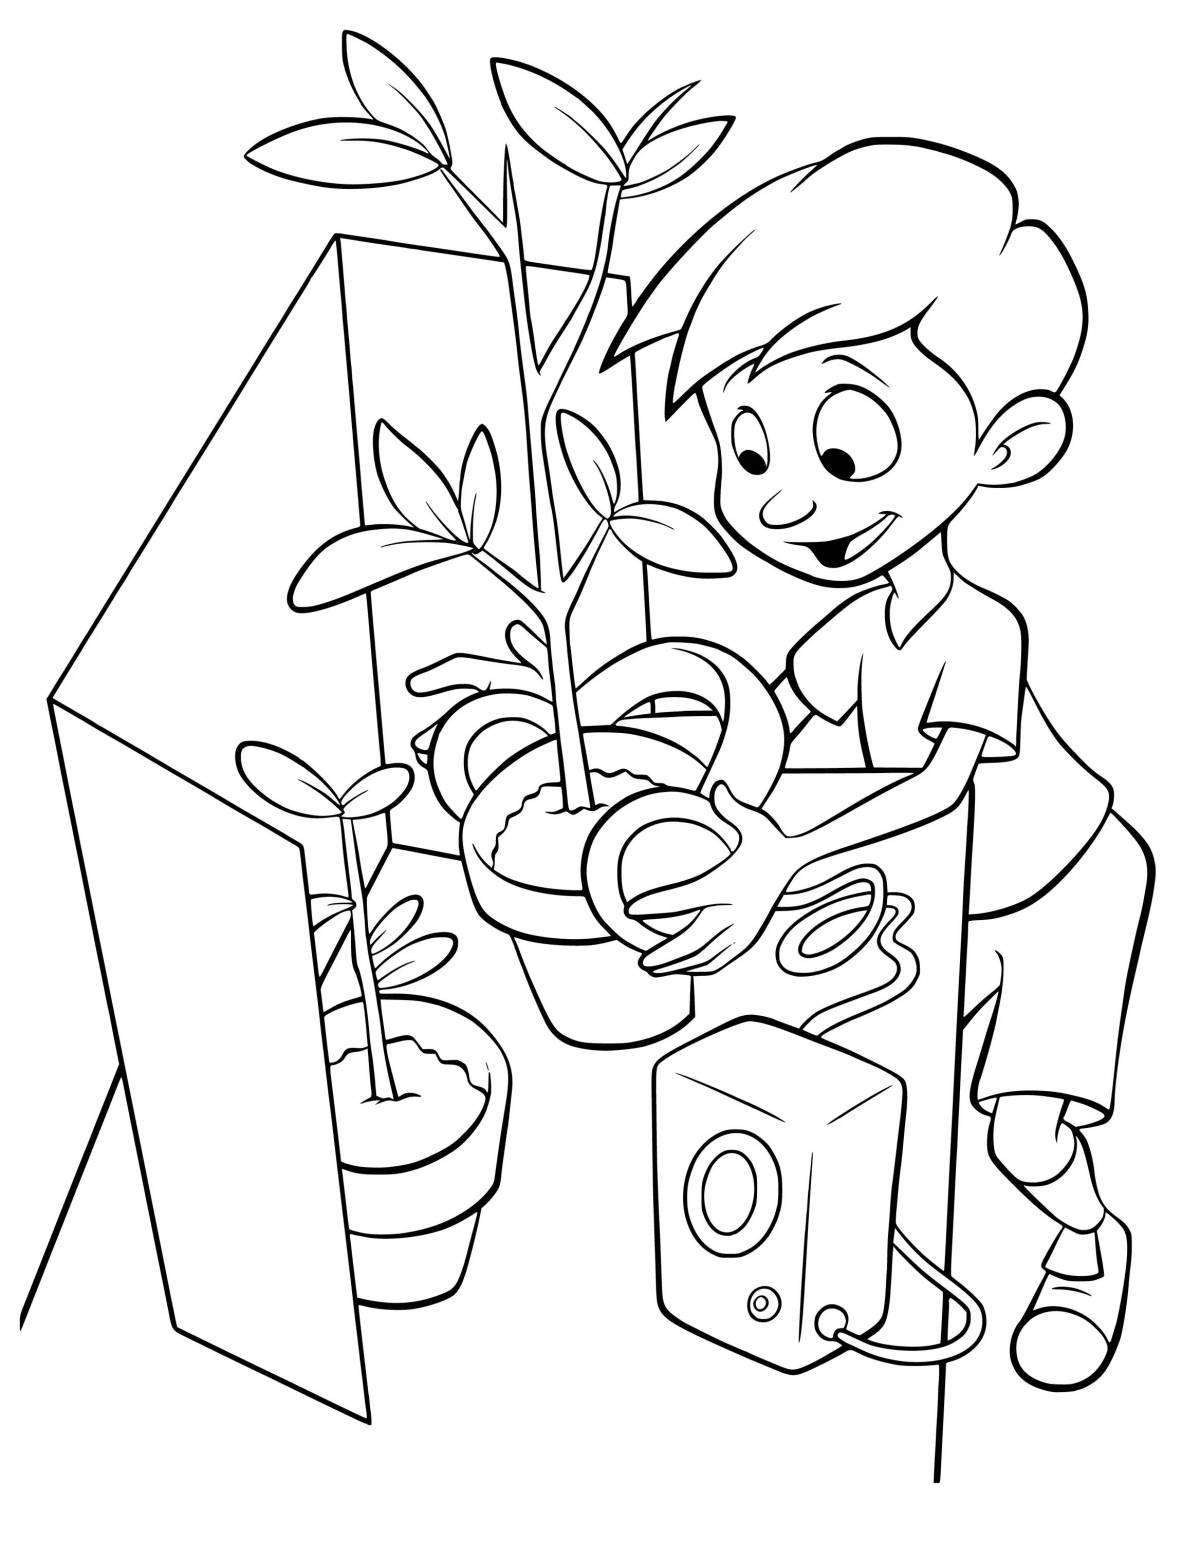 Bright houseplant care for kids